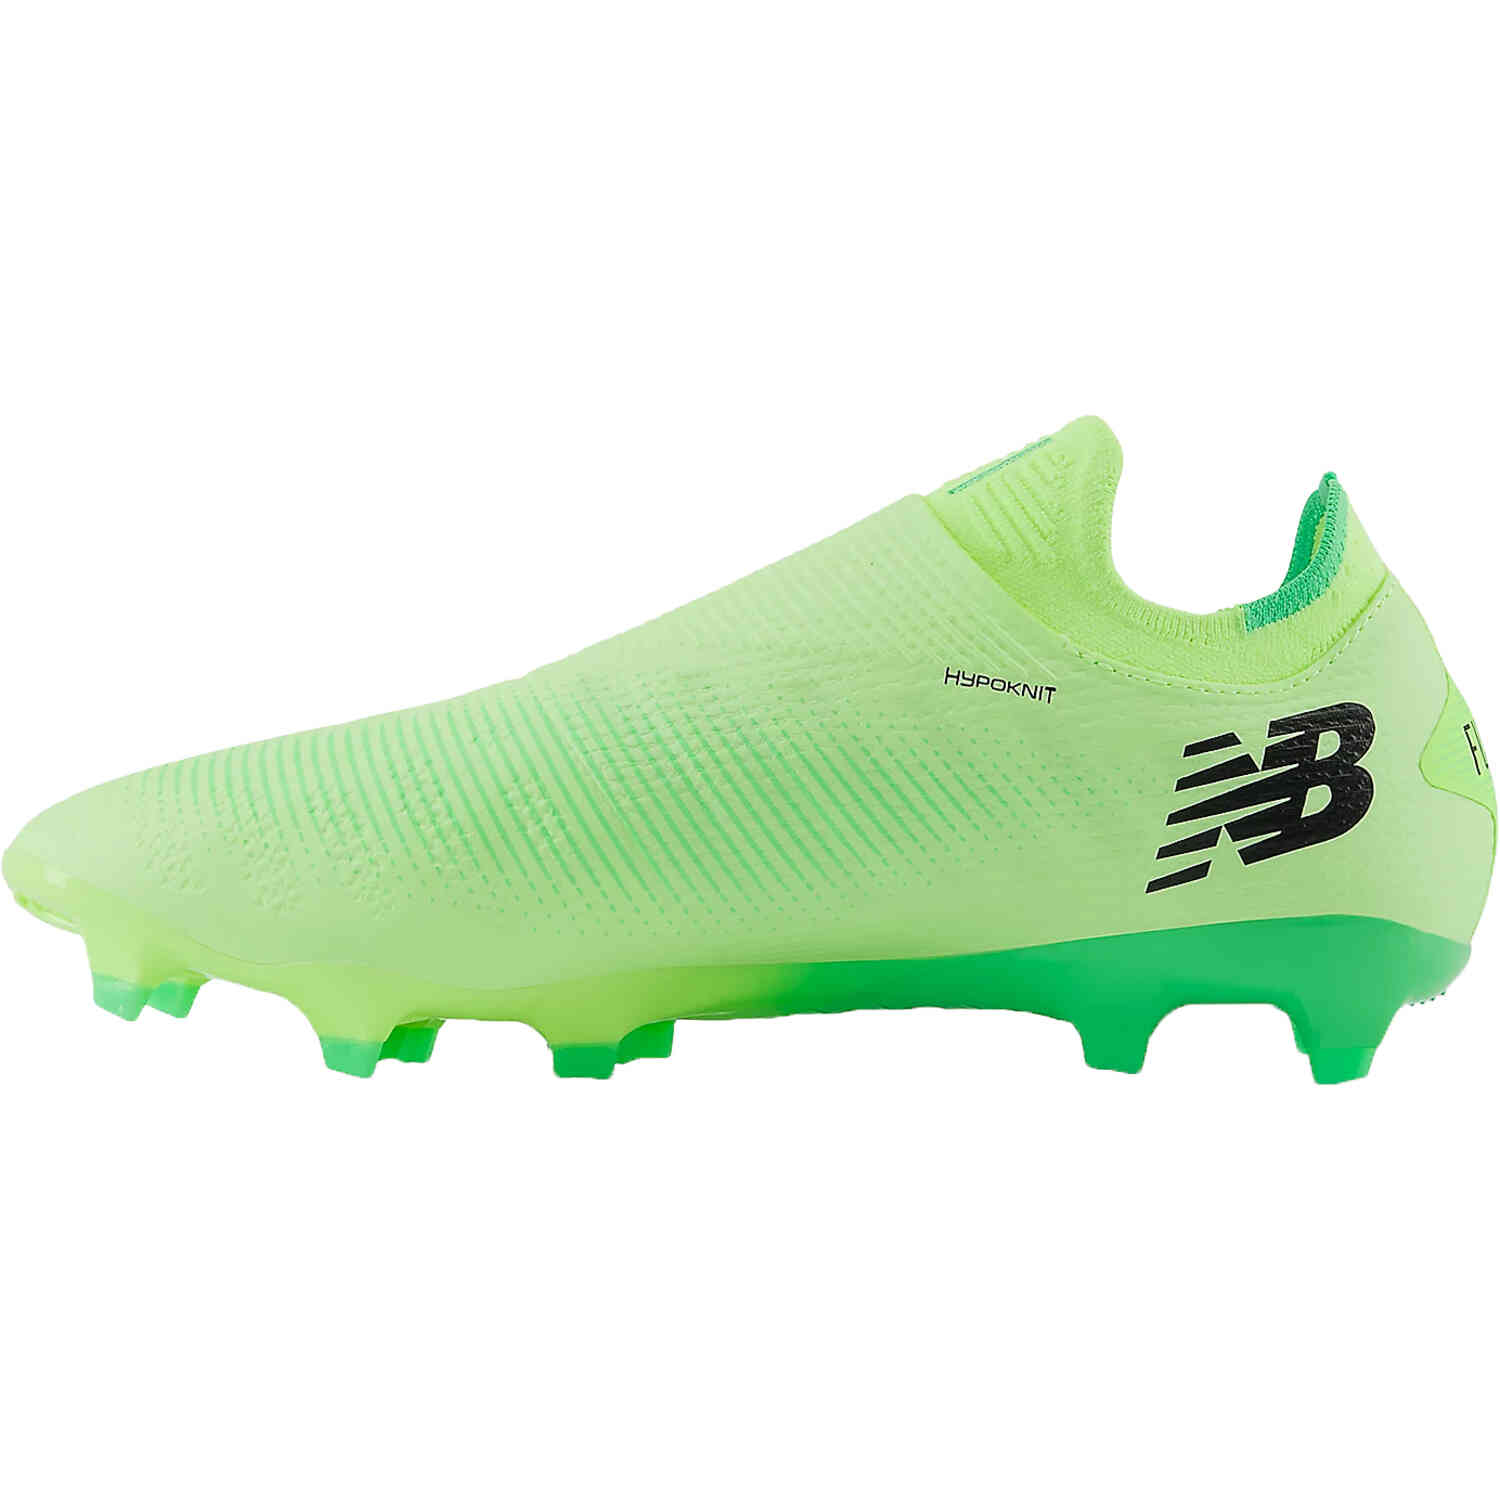 New Balance Furon V7+ Pro FG Firm Ground – Lime Glow Pack